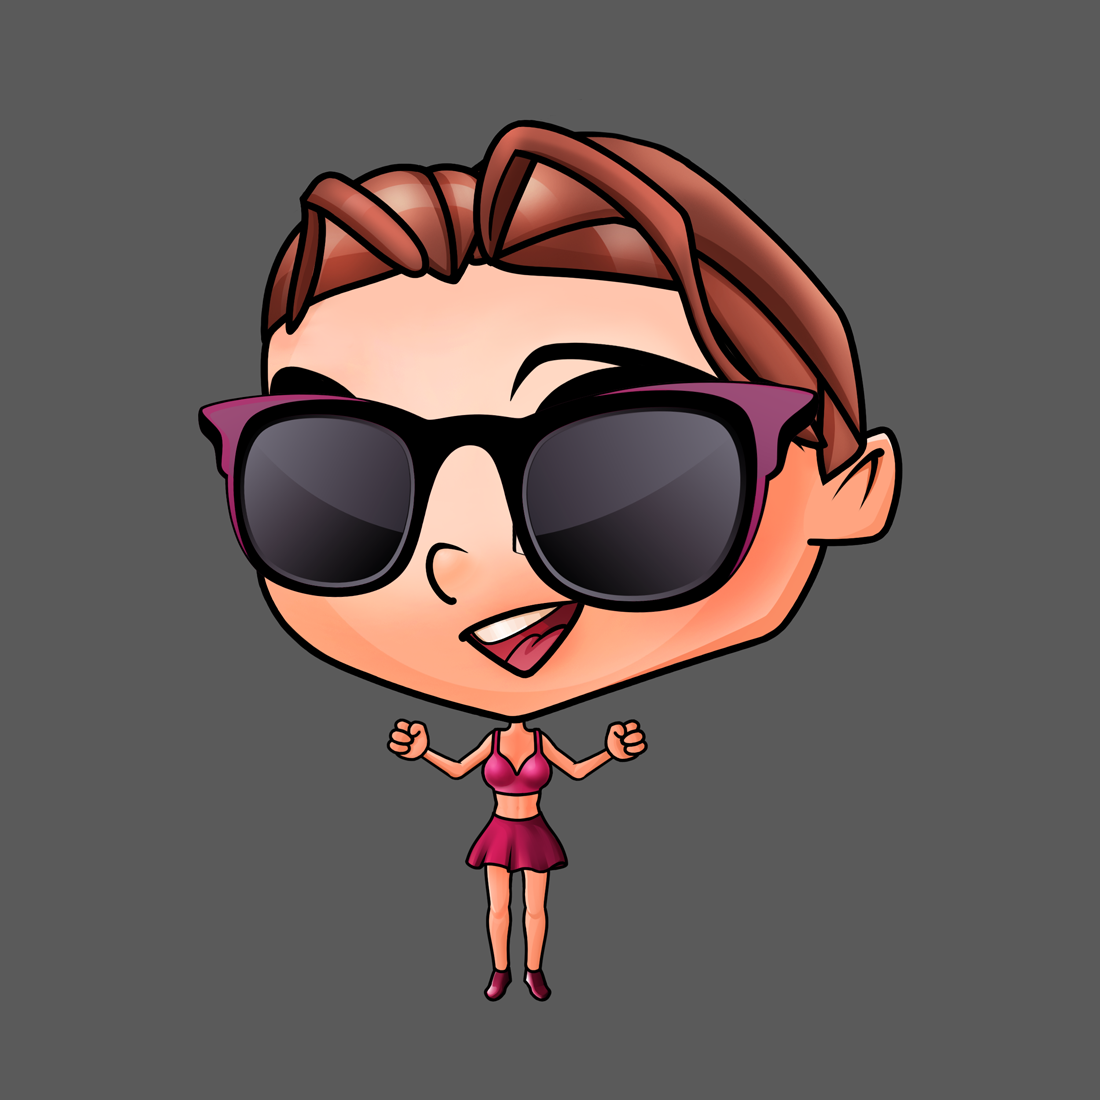 Girl with sunglasses - 2D mobile game character design